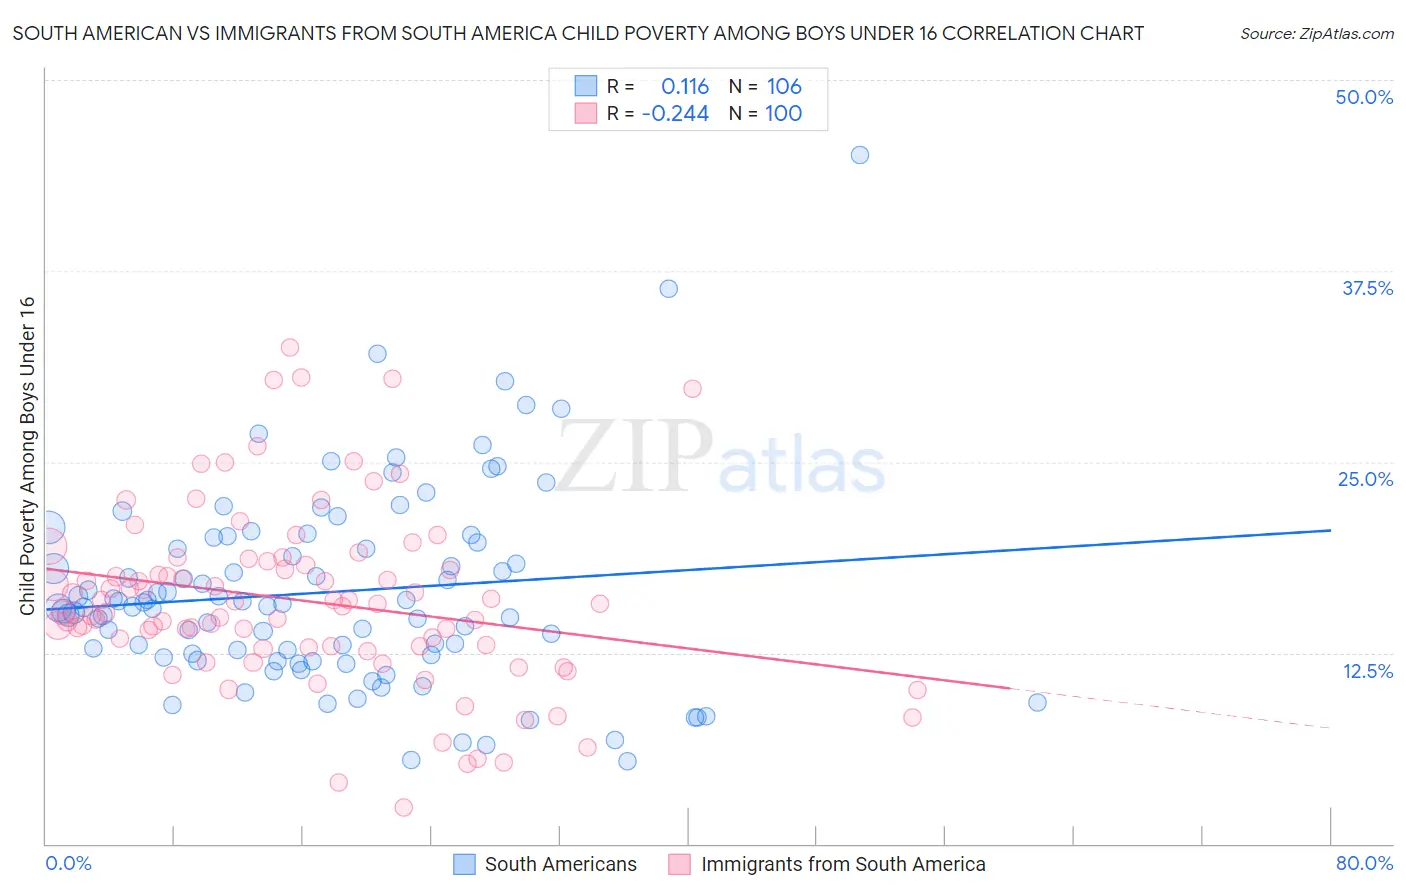 South American vs Immigrants from South America Child Poverty Among Boys Under 16